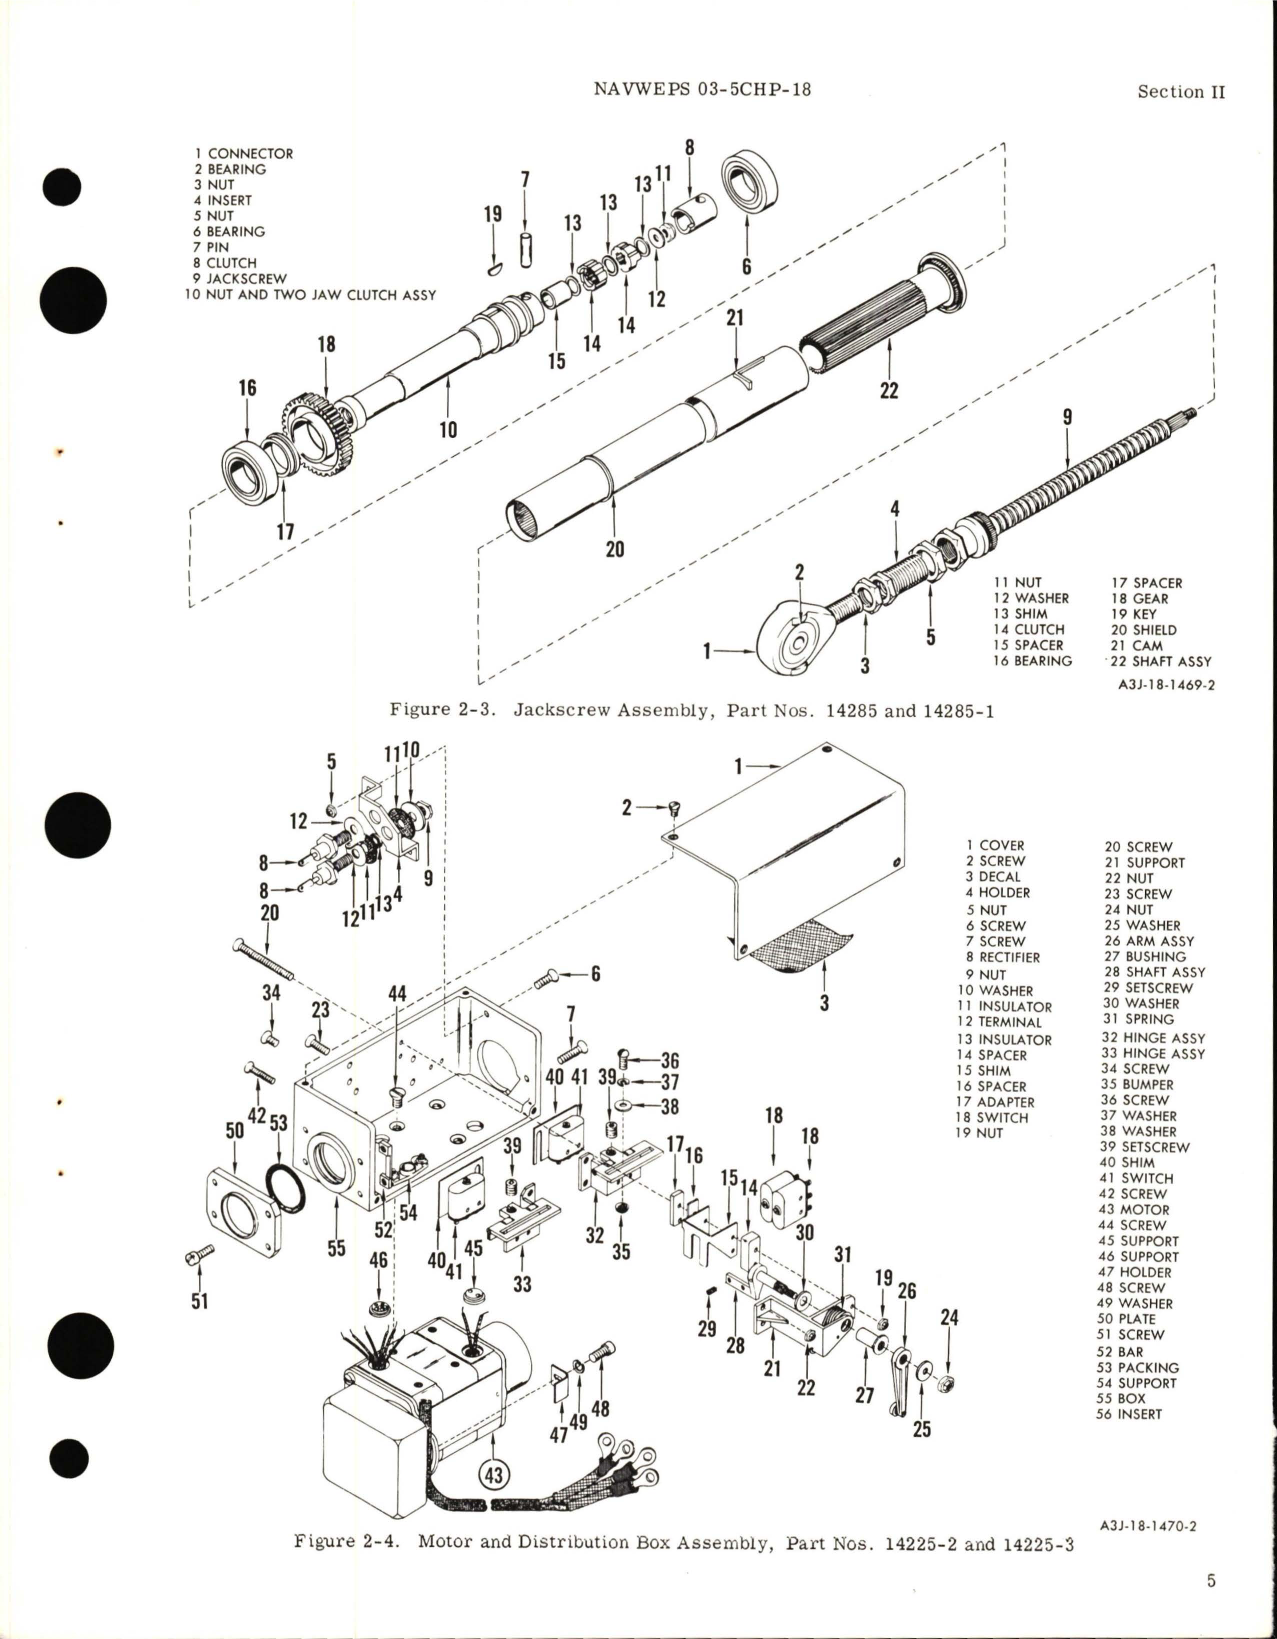 Sample page 9 from AirCorps Library document: Overhaul Instructions for Electro-Mechanical Linear Actuator 3010-4, 3020-5, 3040-4, 3060-4, 3590-3, and 6440